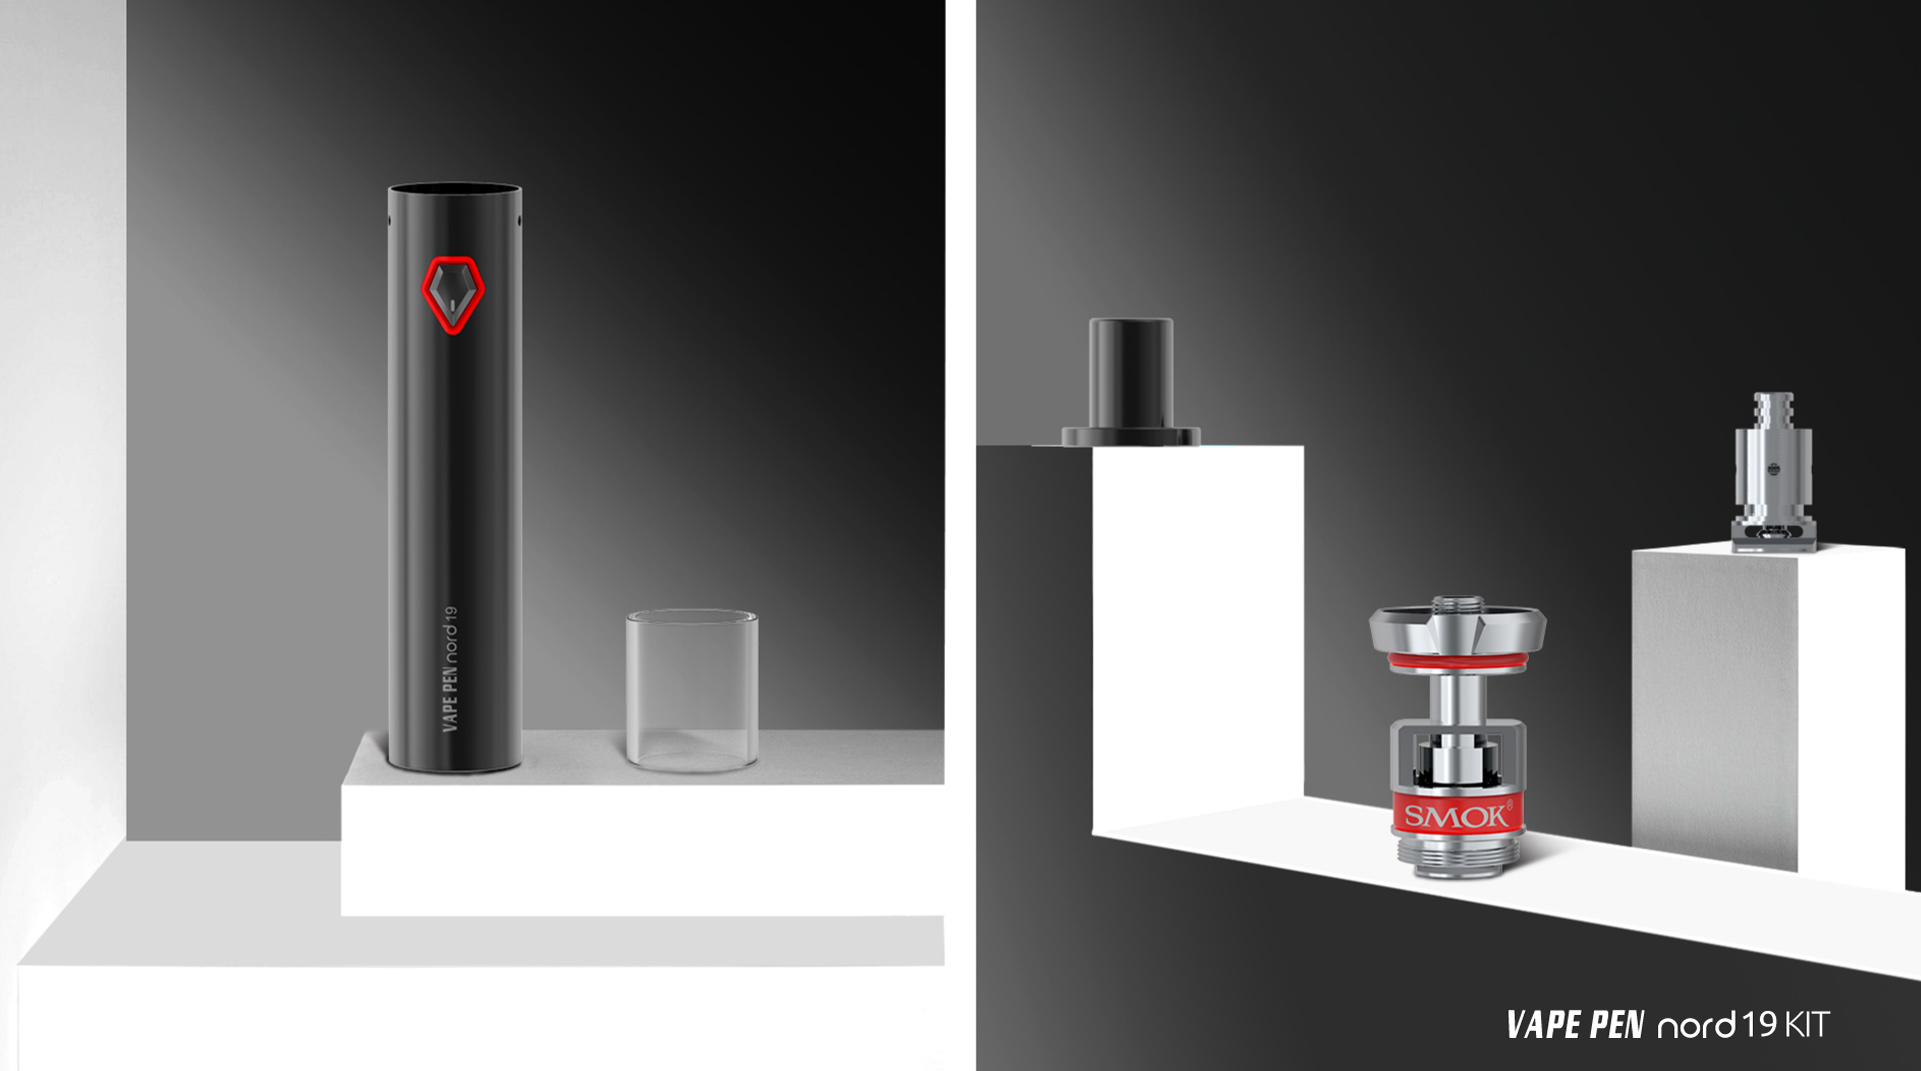 Vape Pen Nord 19&22 with Detachable Structure for Convenient Cleaning - SMOK Official Site